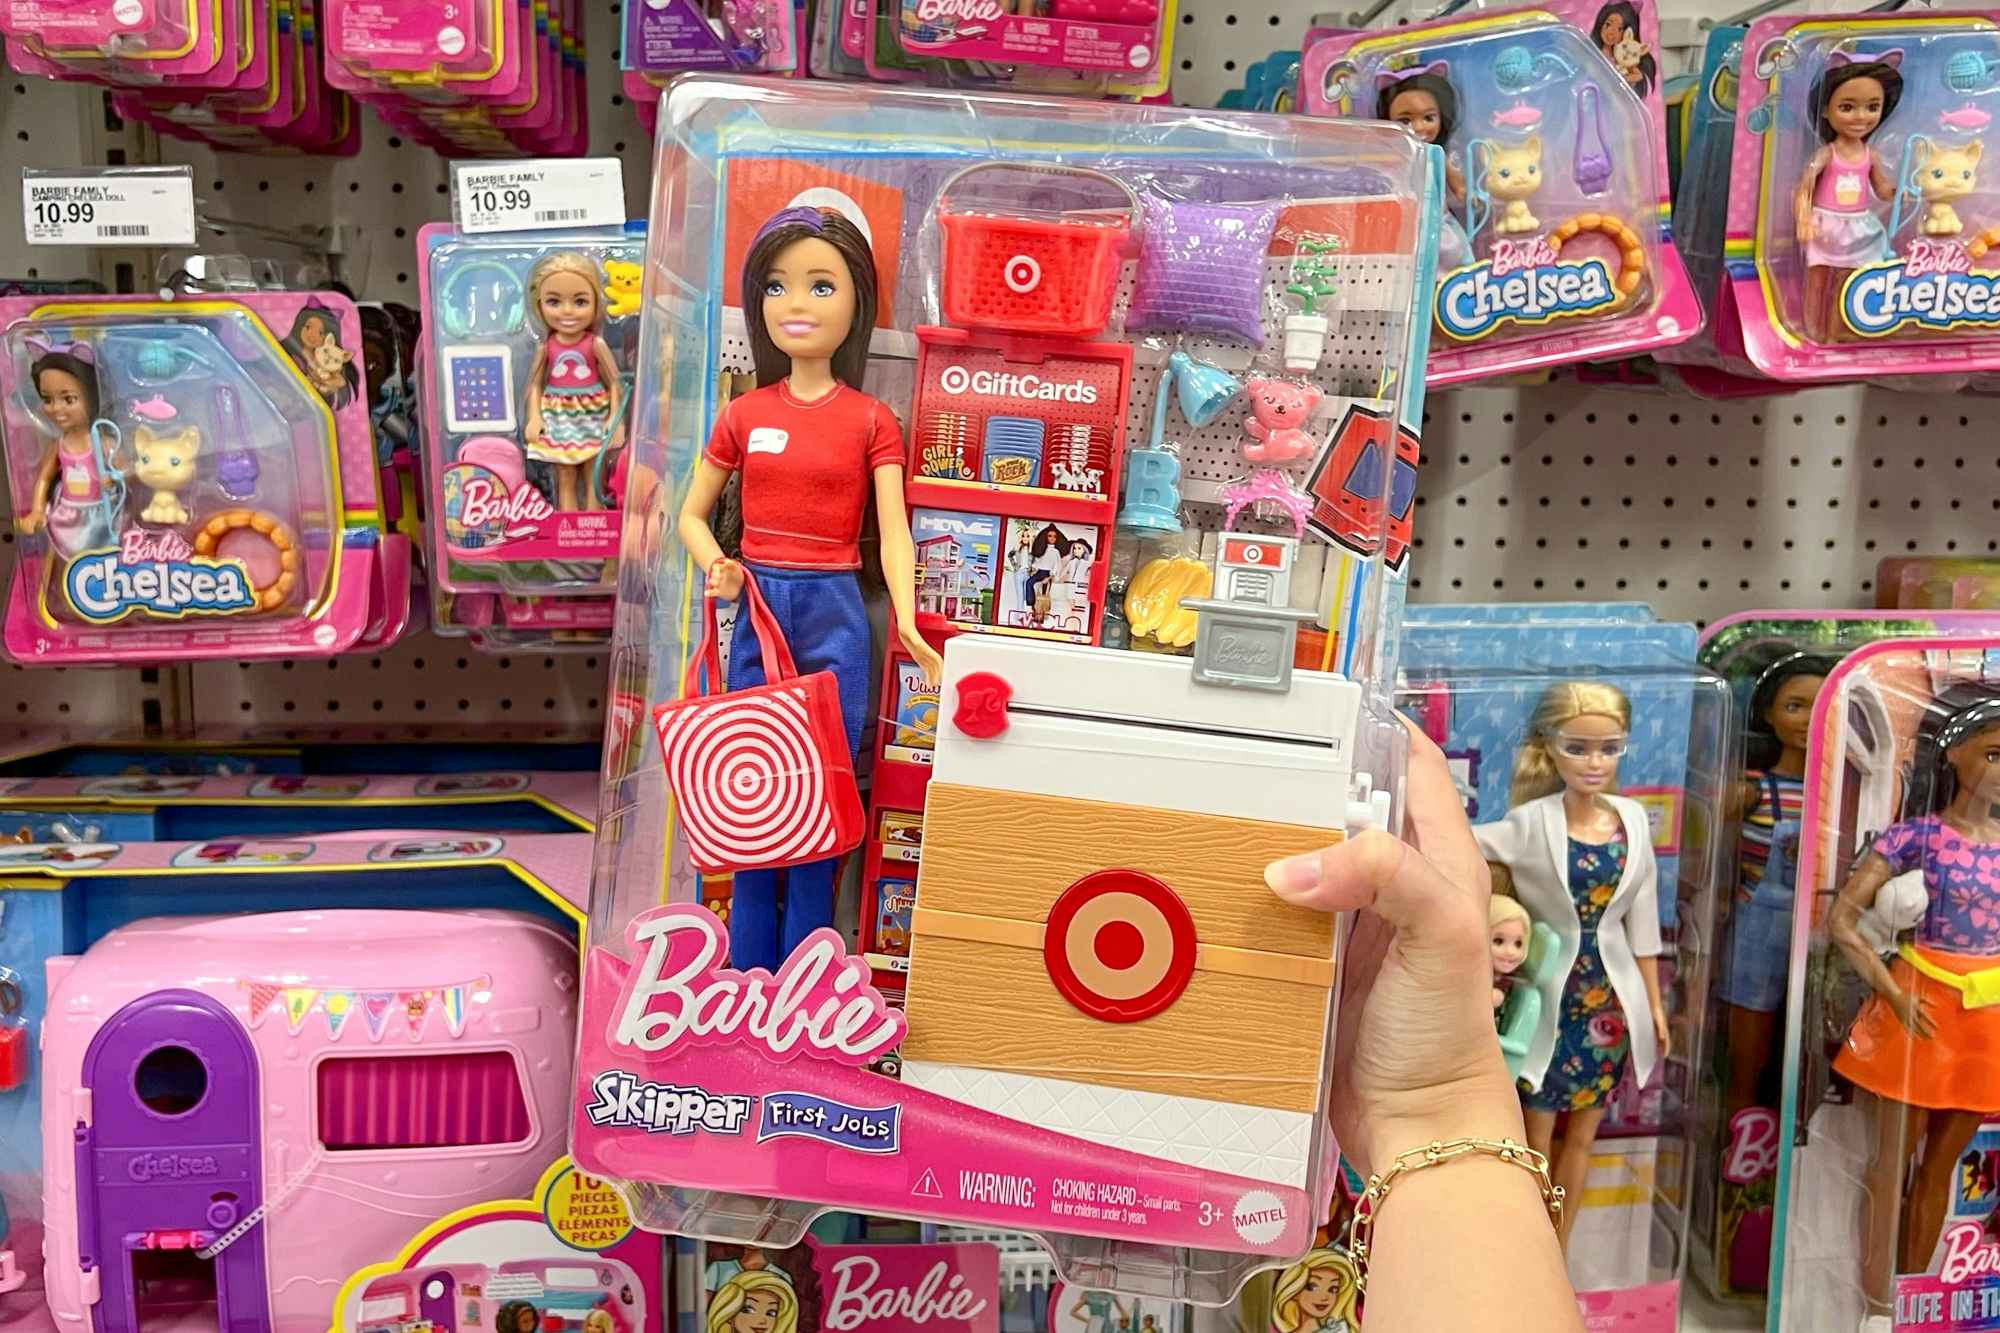 Someone holding a Target Barbie doll in front of a shelf